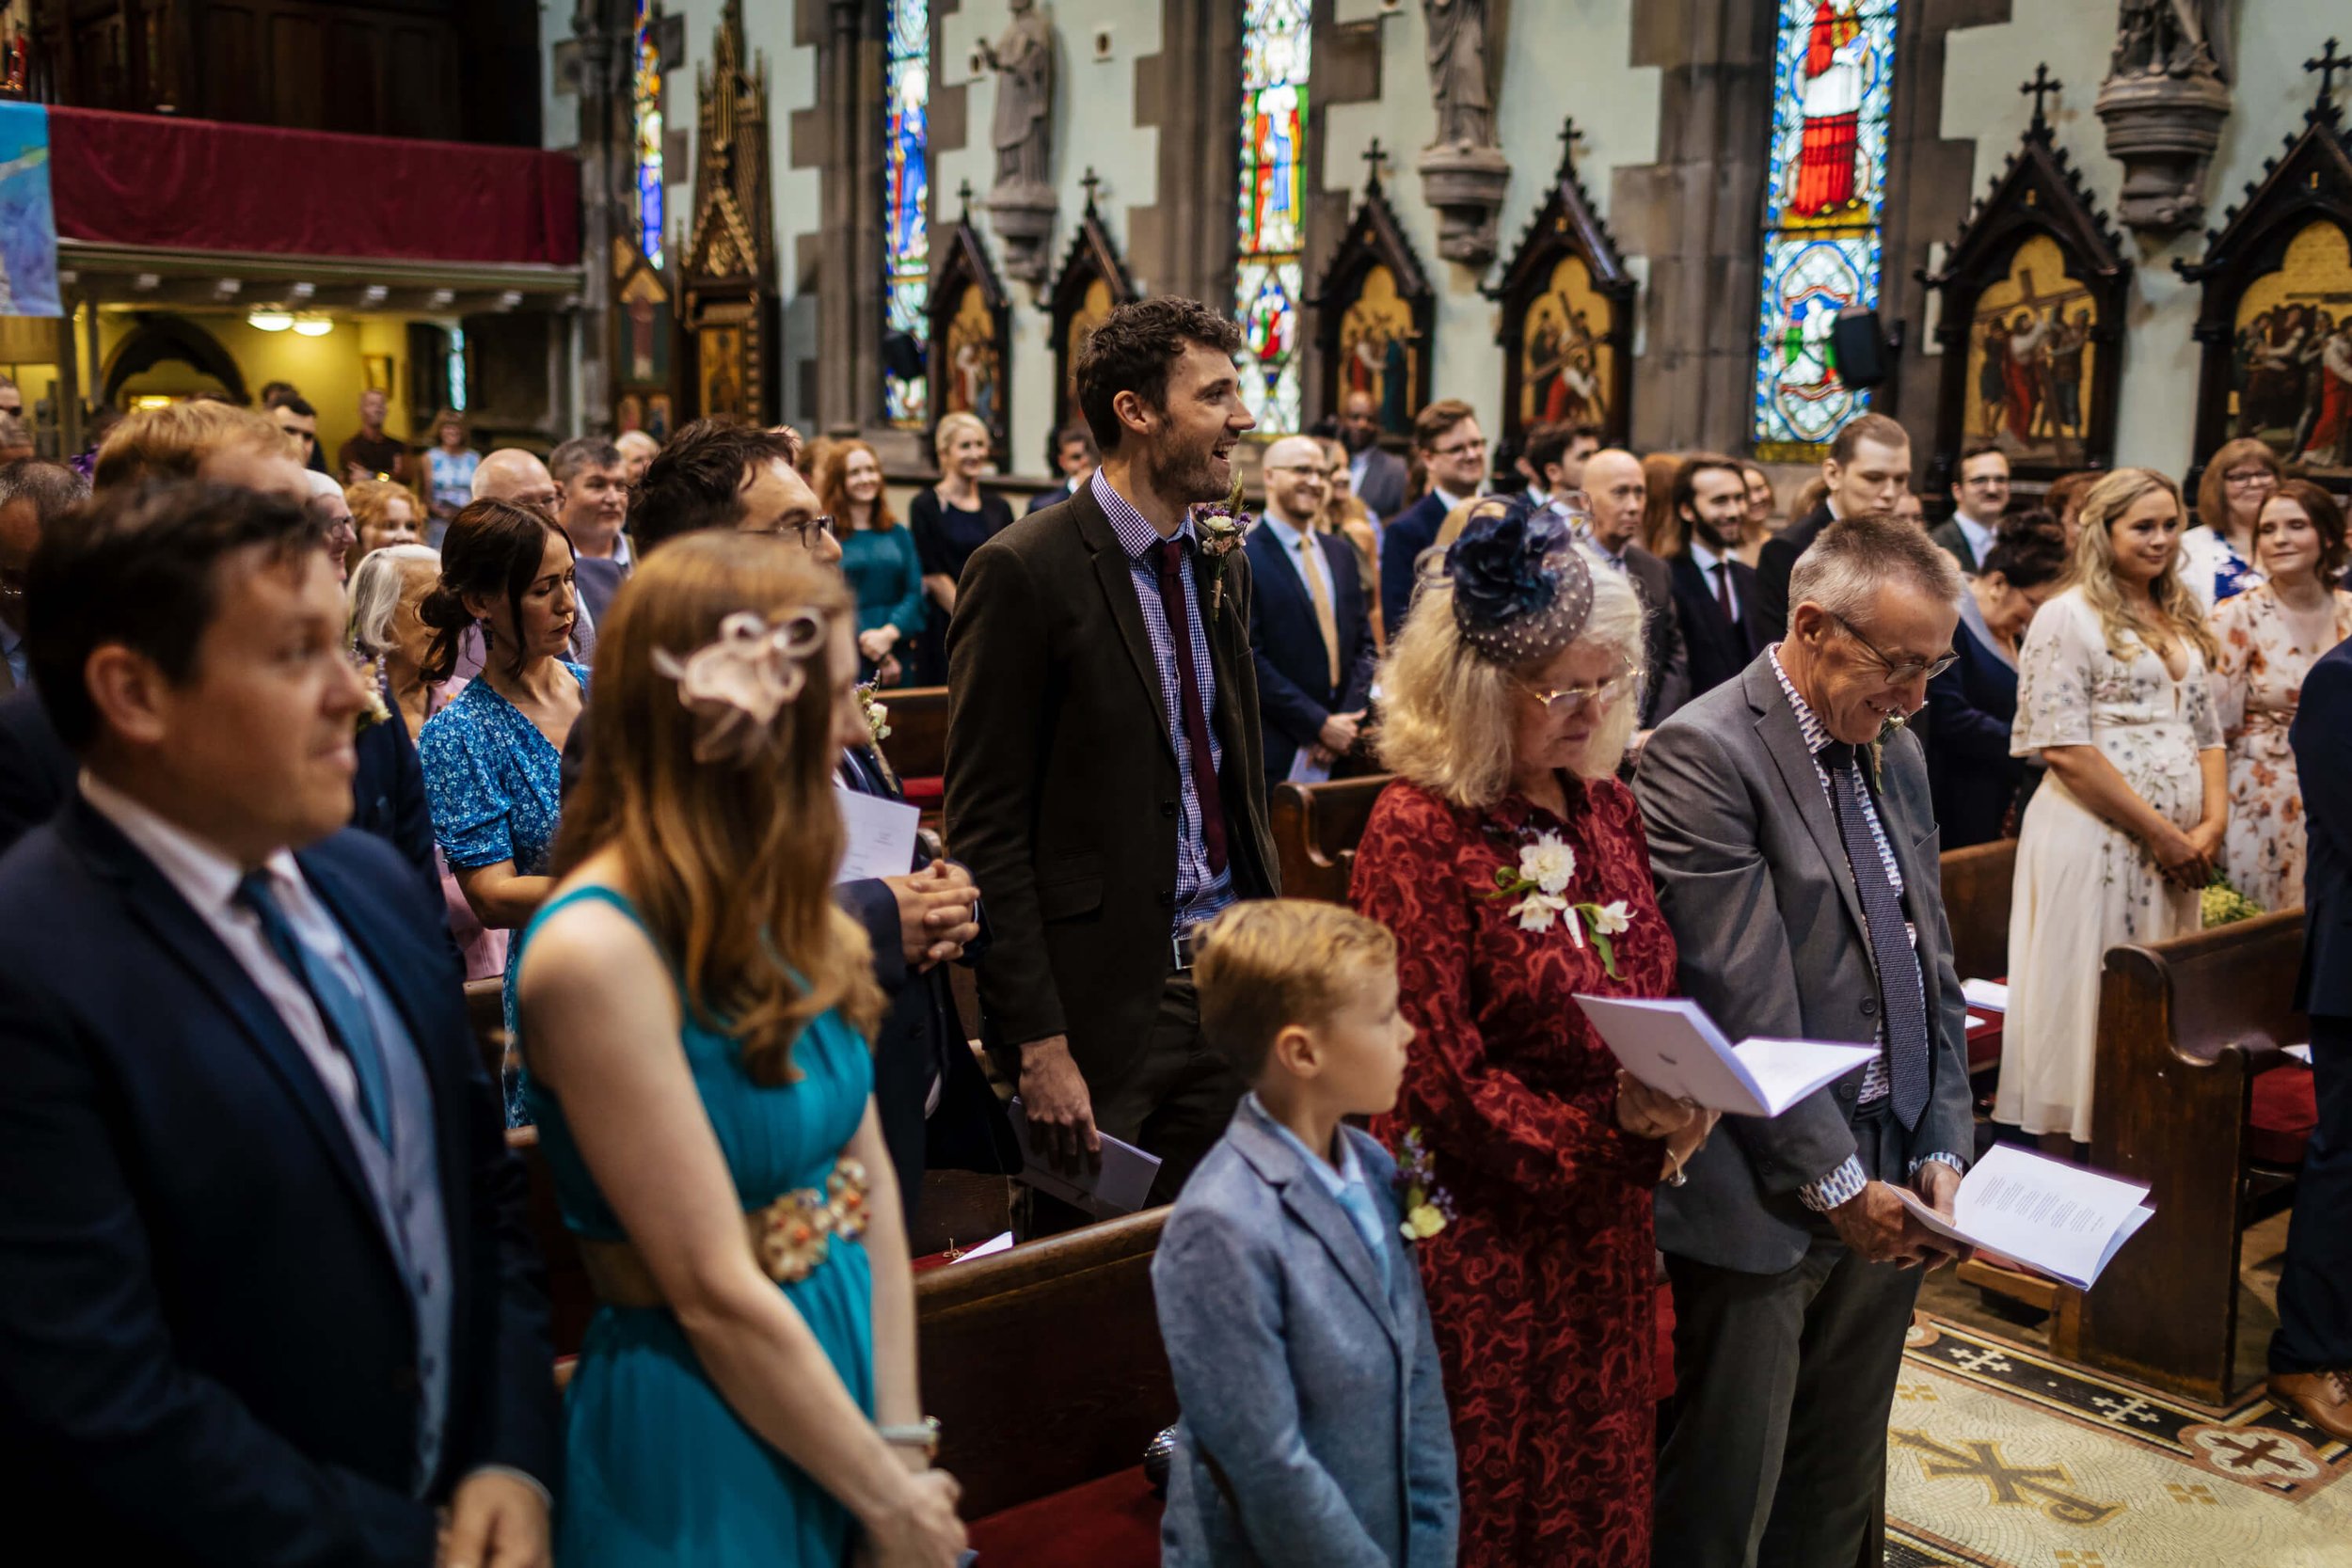 Wedding guests singing hymns in the church